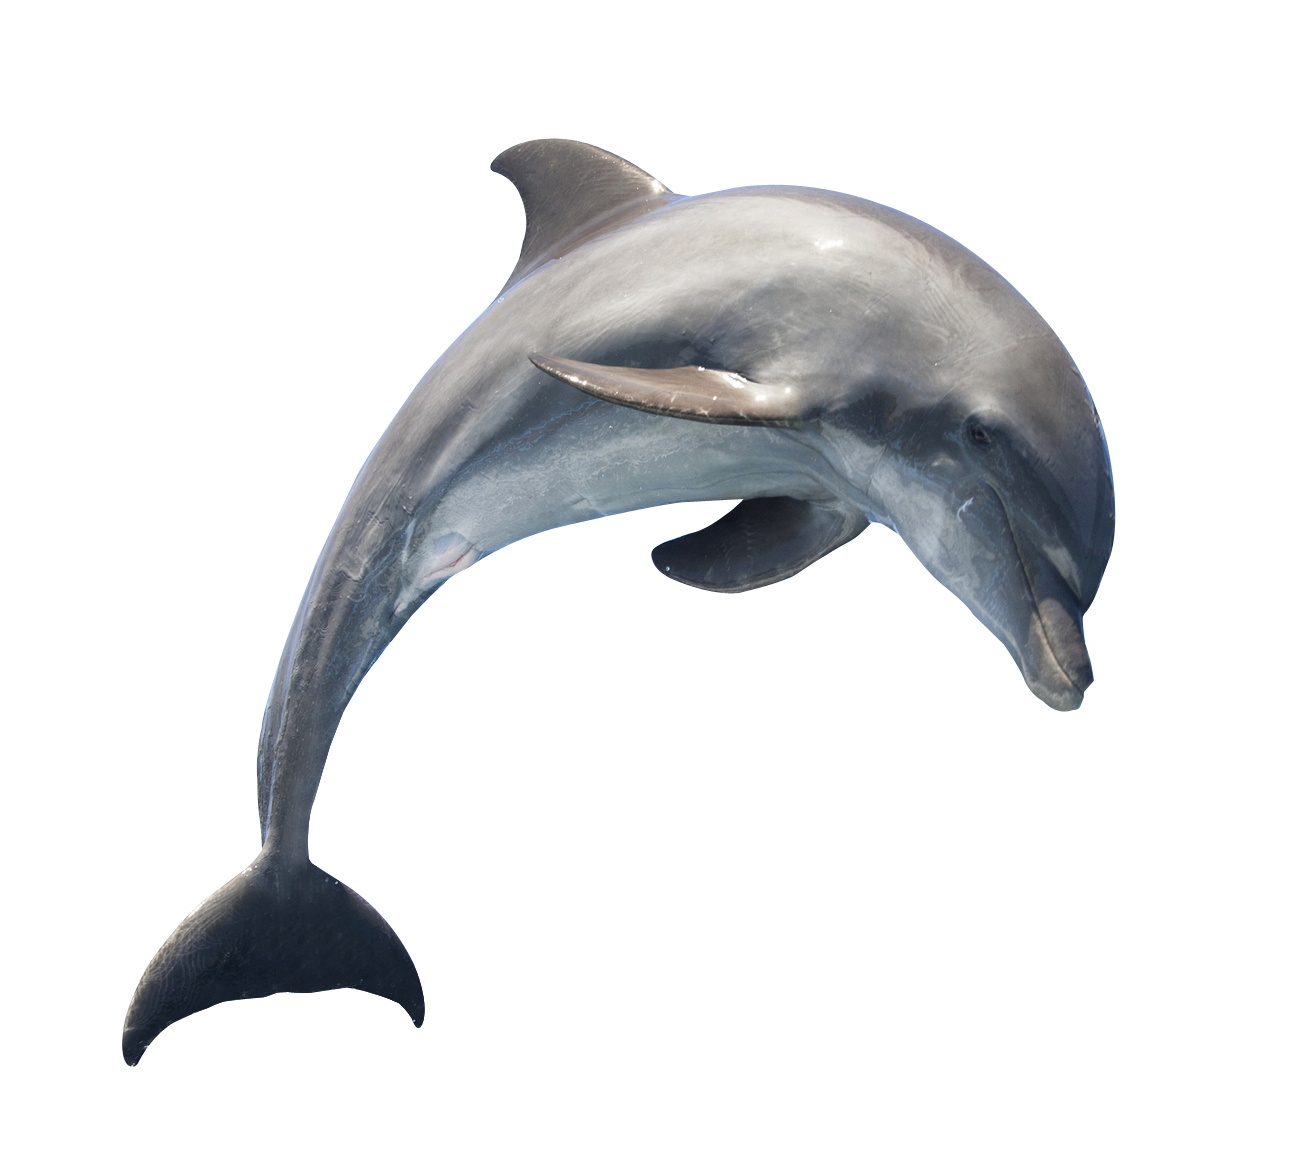 png 1280x1024 Dolphin with no